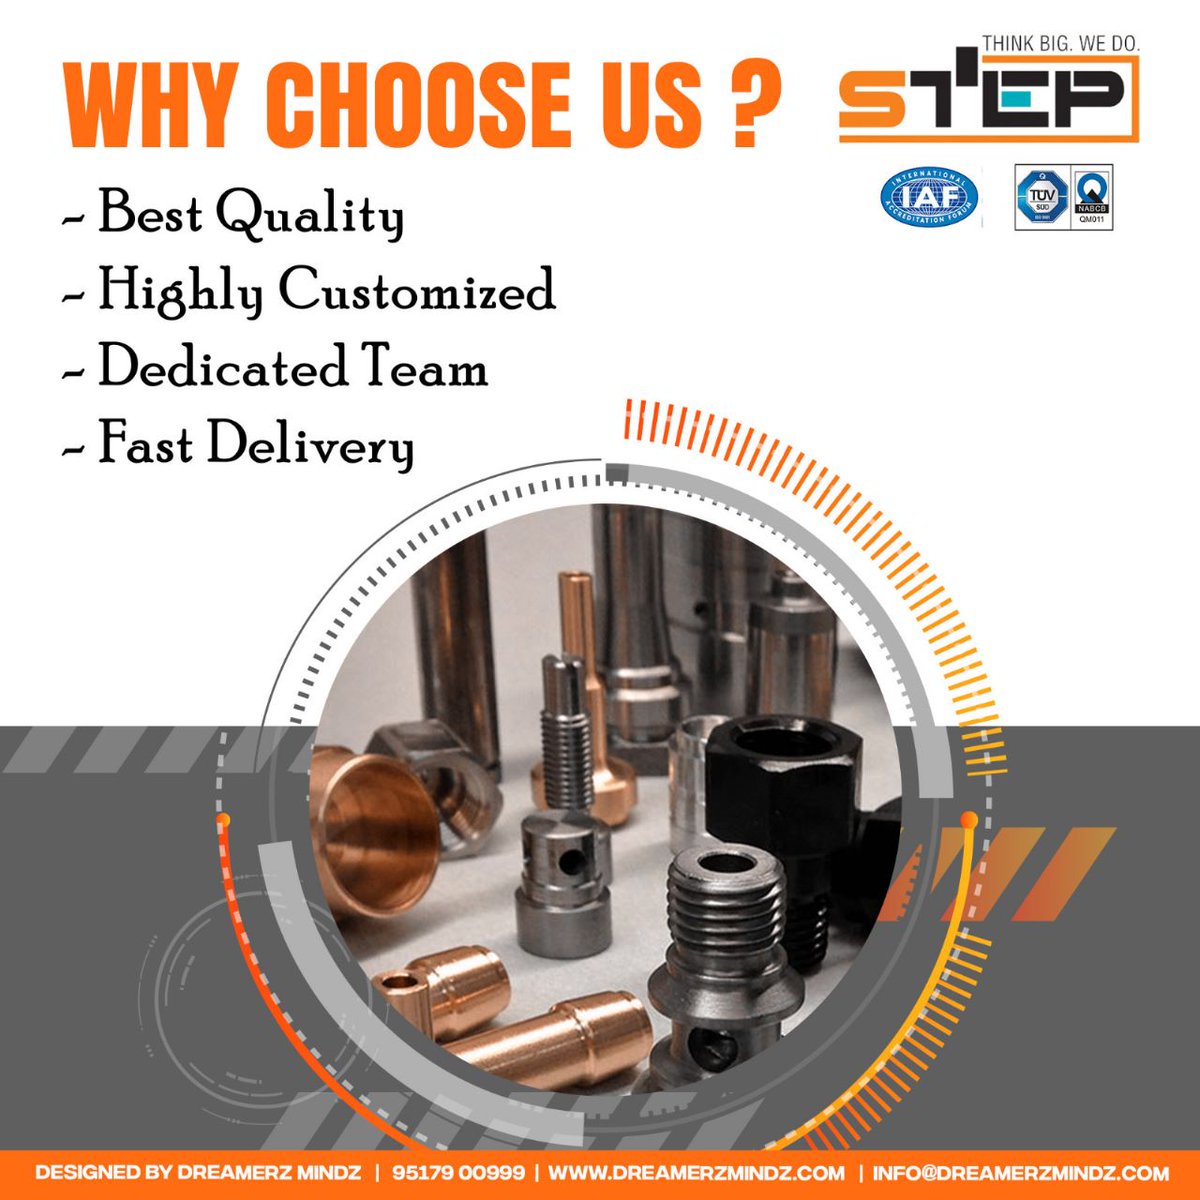 Why Choose STEP - System Tools & Engineering Products:
.
.
#step #systemtoolsandengineeringproducts #systemtools #machineparts #tractorparts #jcb #culturemachineparts #engineeringproducts #industrialparts #automationparts #machiningparts #trendingnow